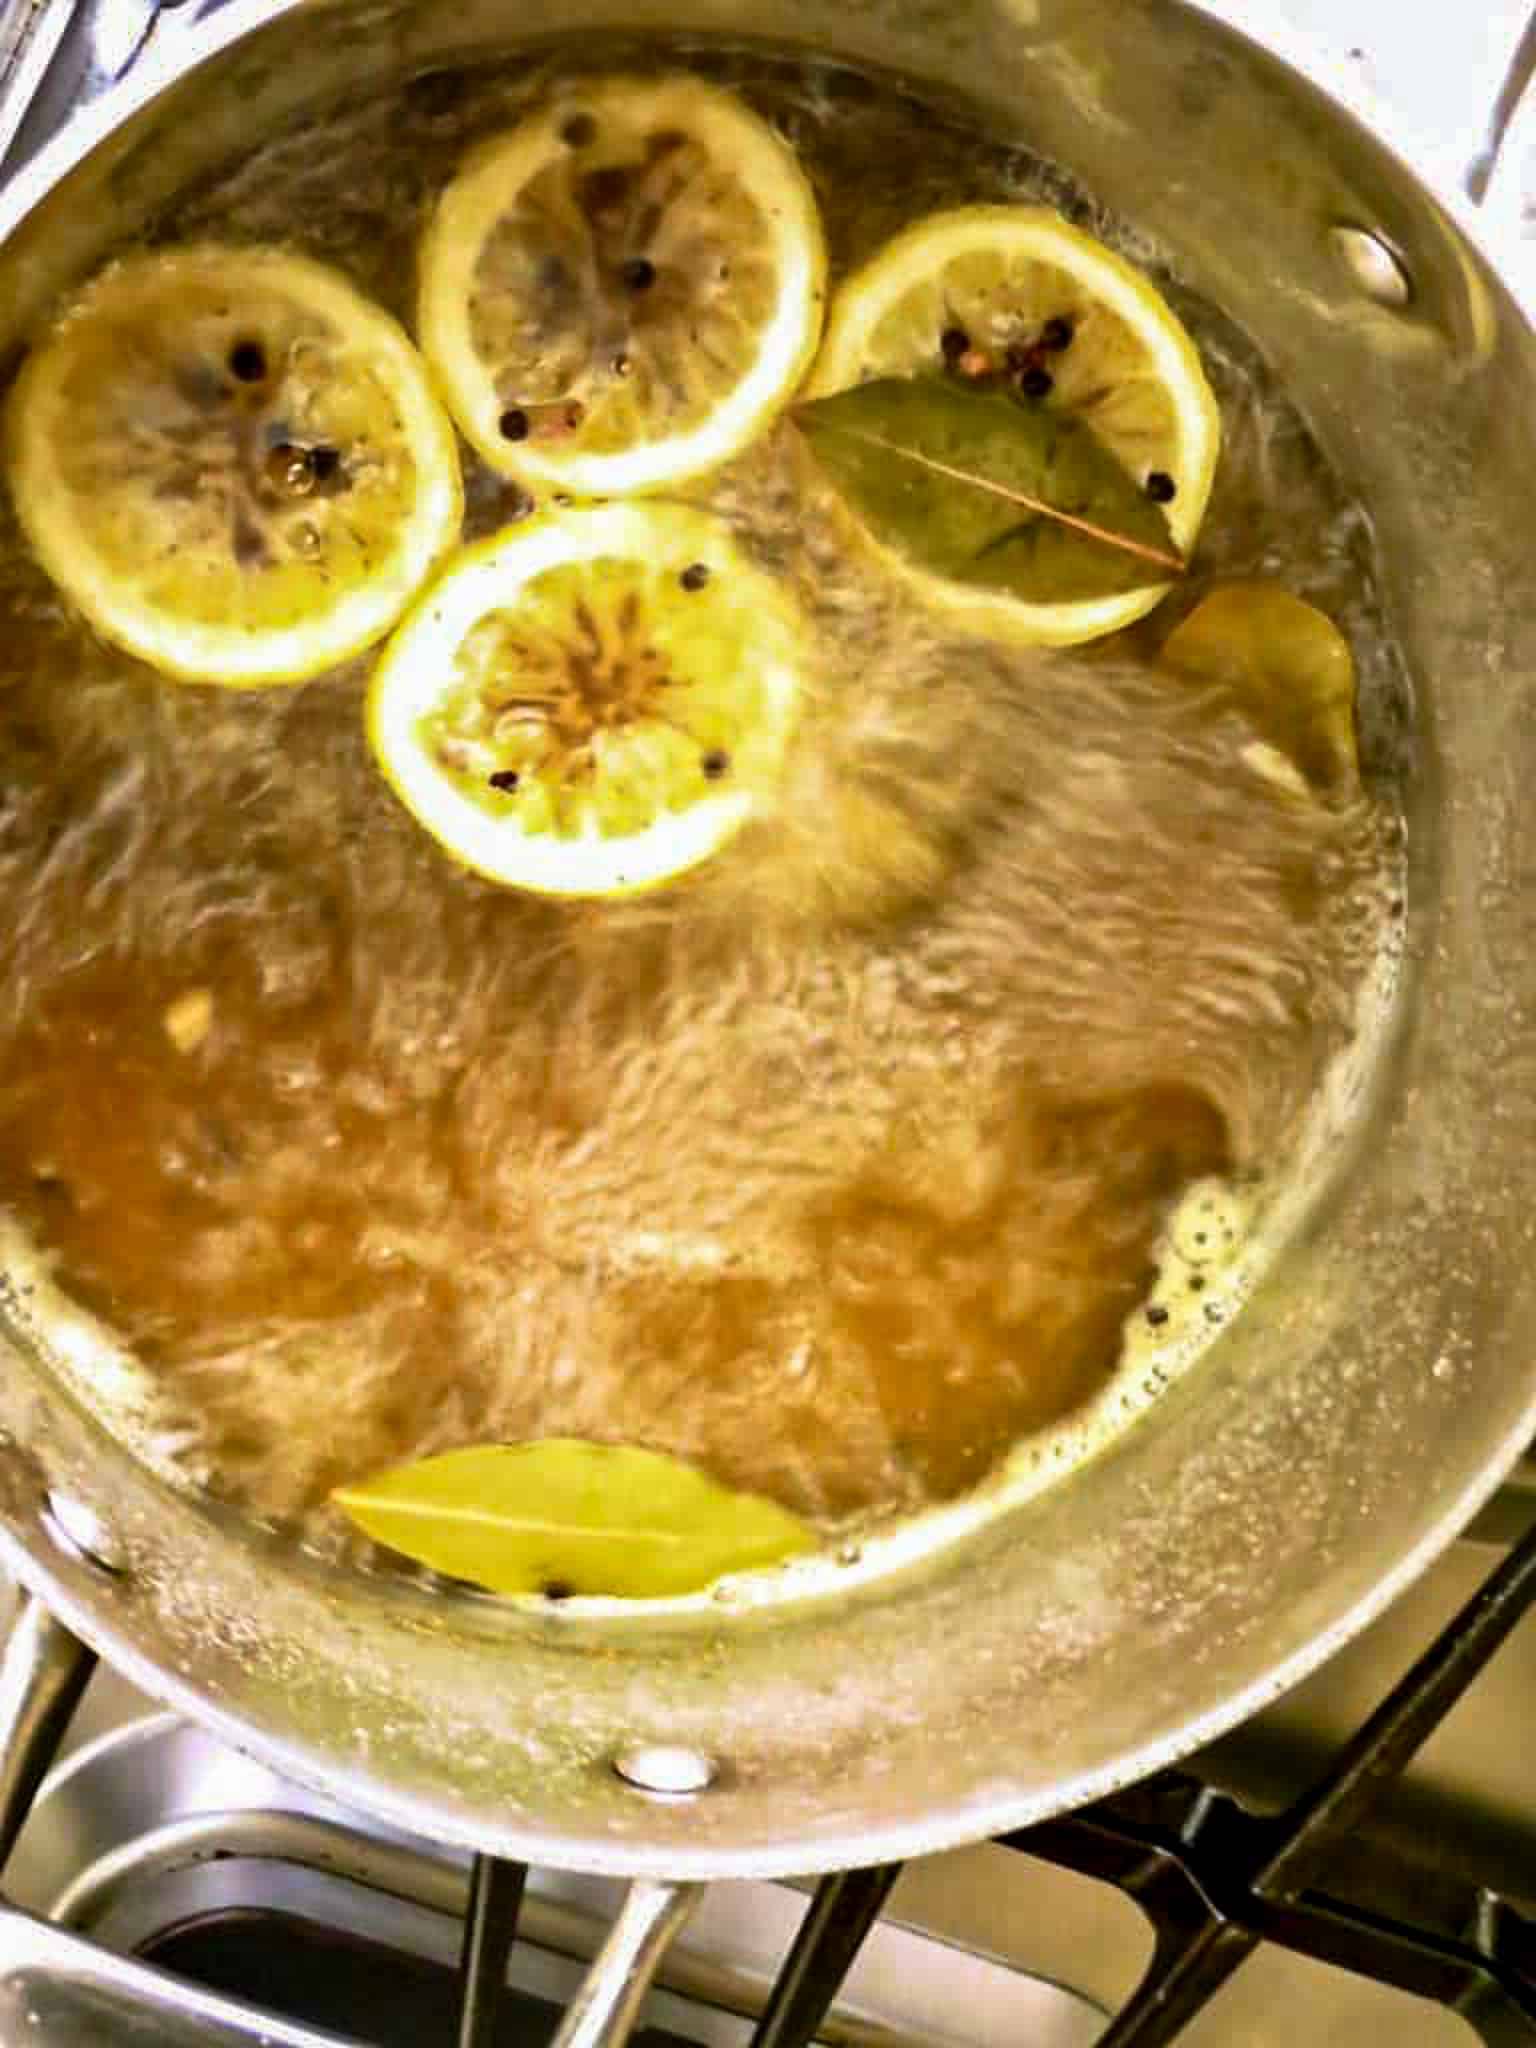 A pot of boiling water with lemon halves and bay leaves.